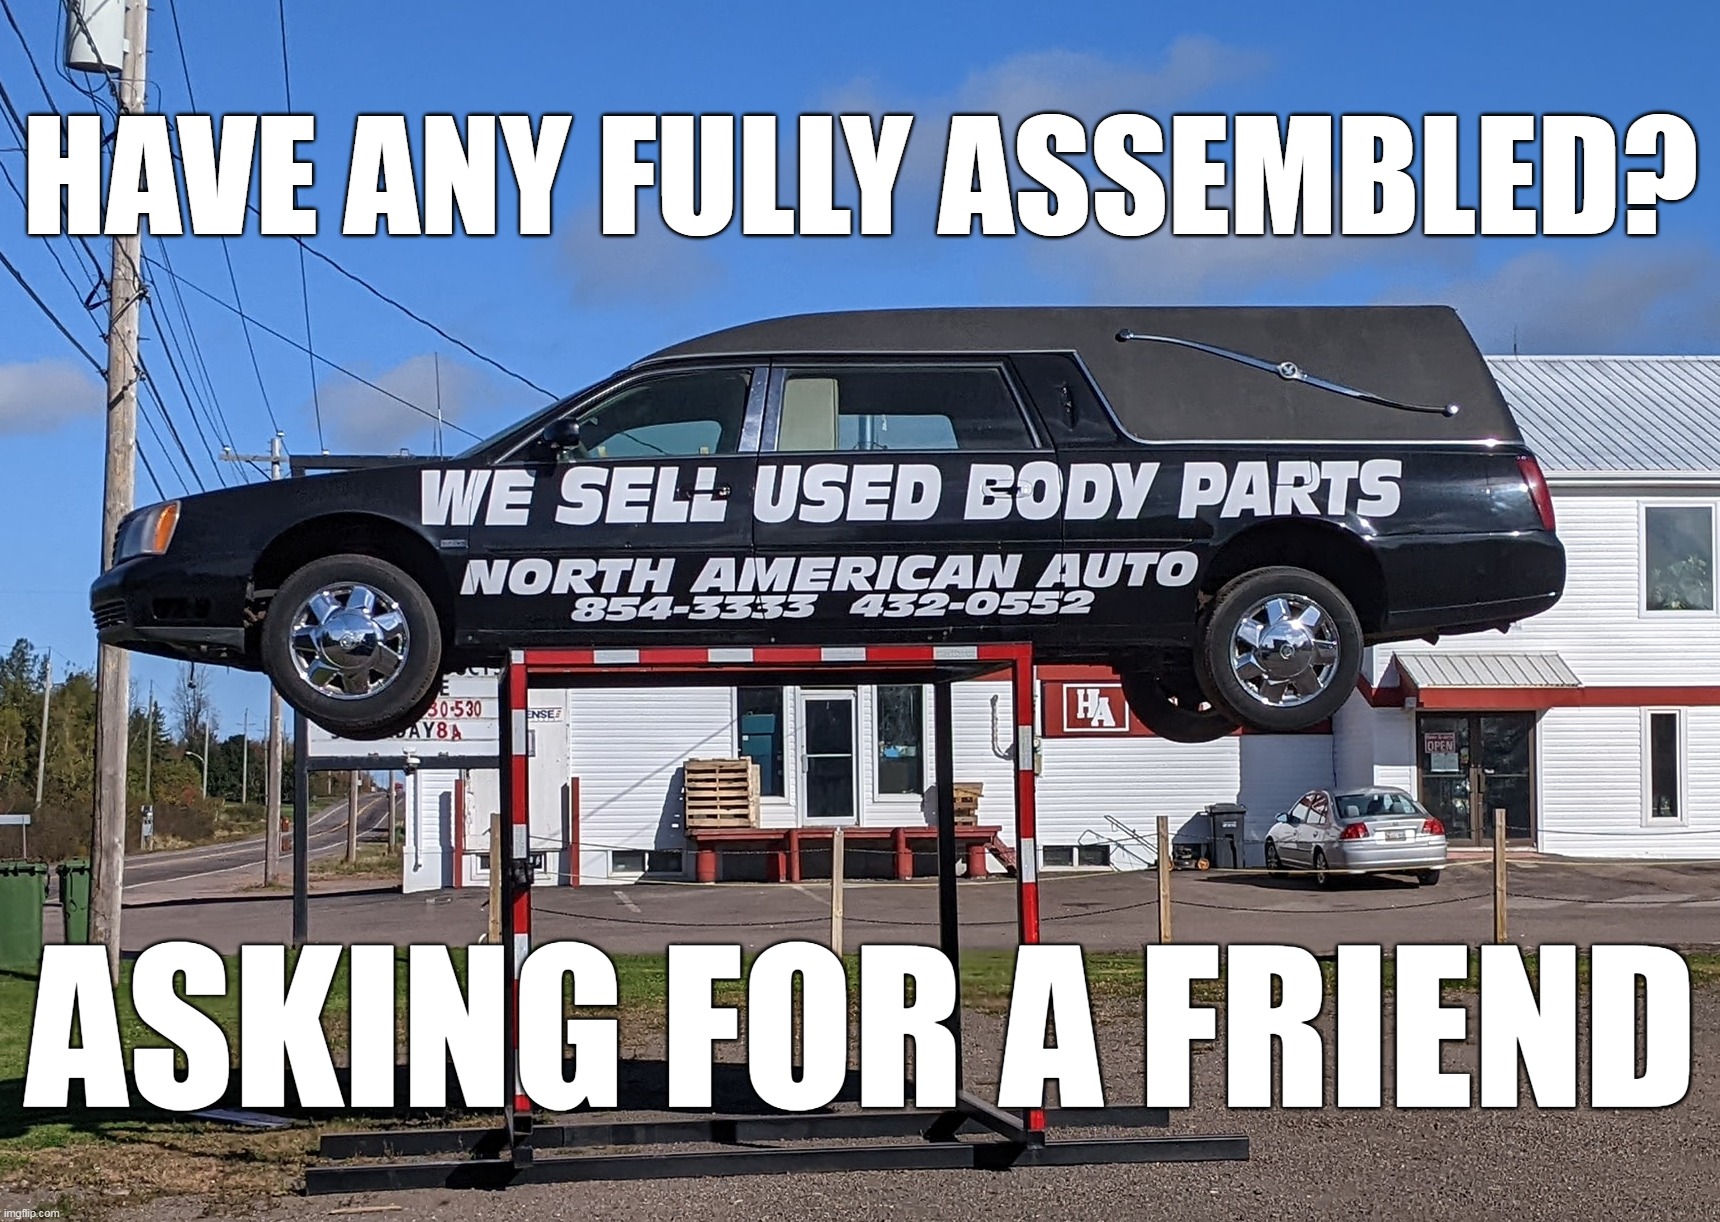 HAVE ANY FULLY ASSEMBLED? ASKING FOR A FRIEND | image tagged in meme,memes,humor,dark humor,signs,funny | made w/ Imgflip meme maker